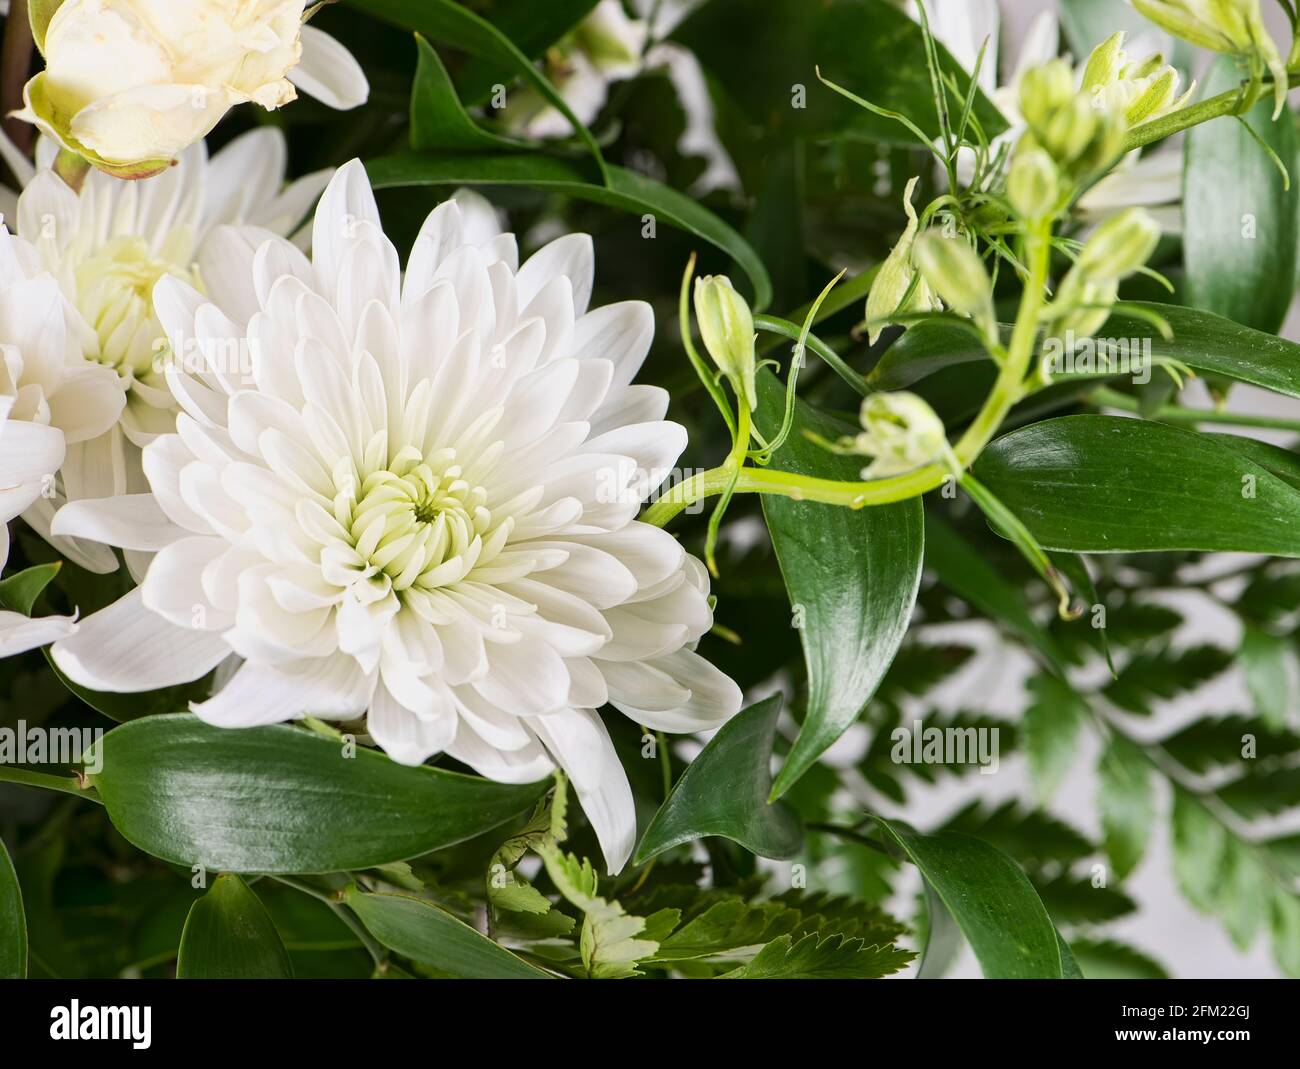 Floral Bouquet with white rose and white chrysanthemums Stock Photo